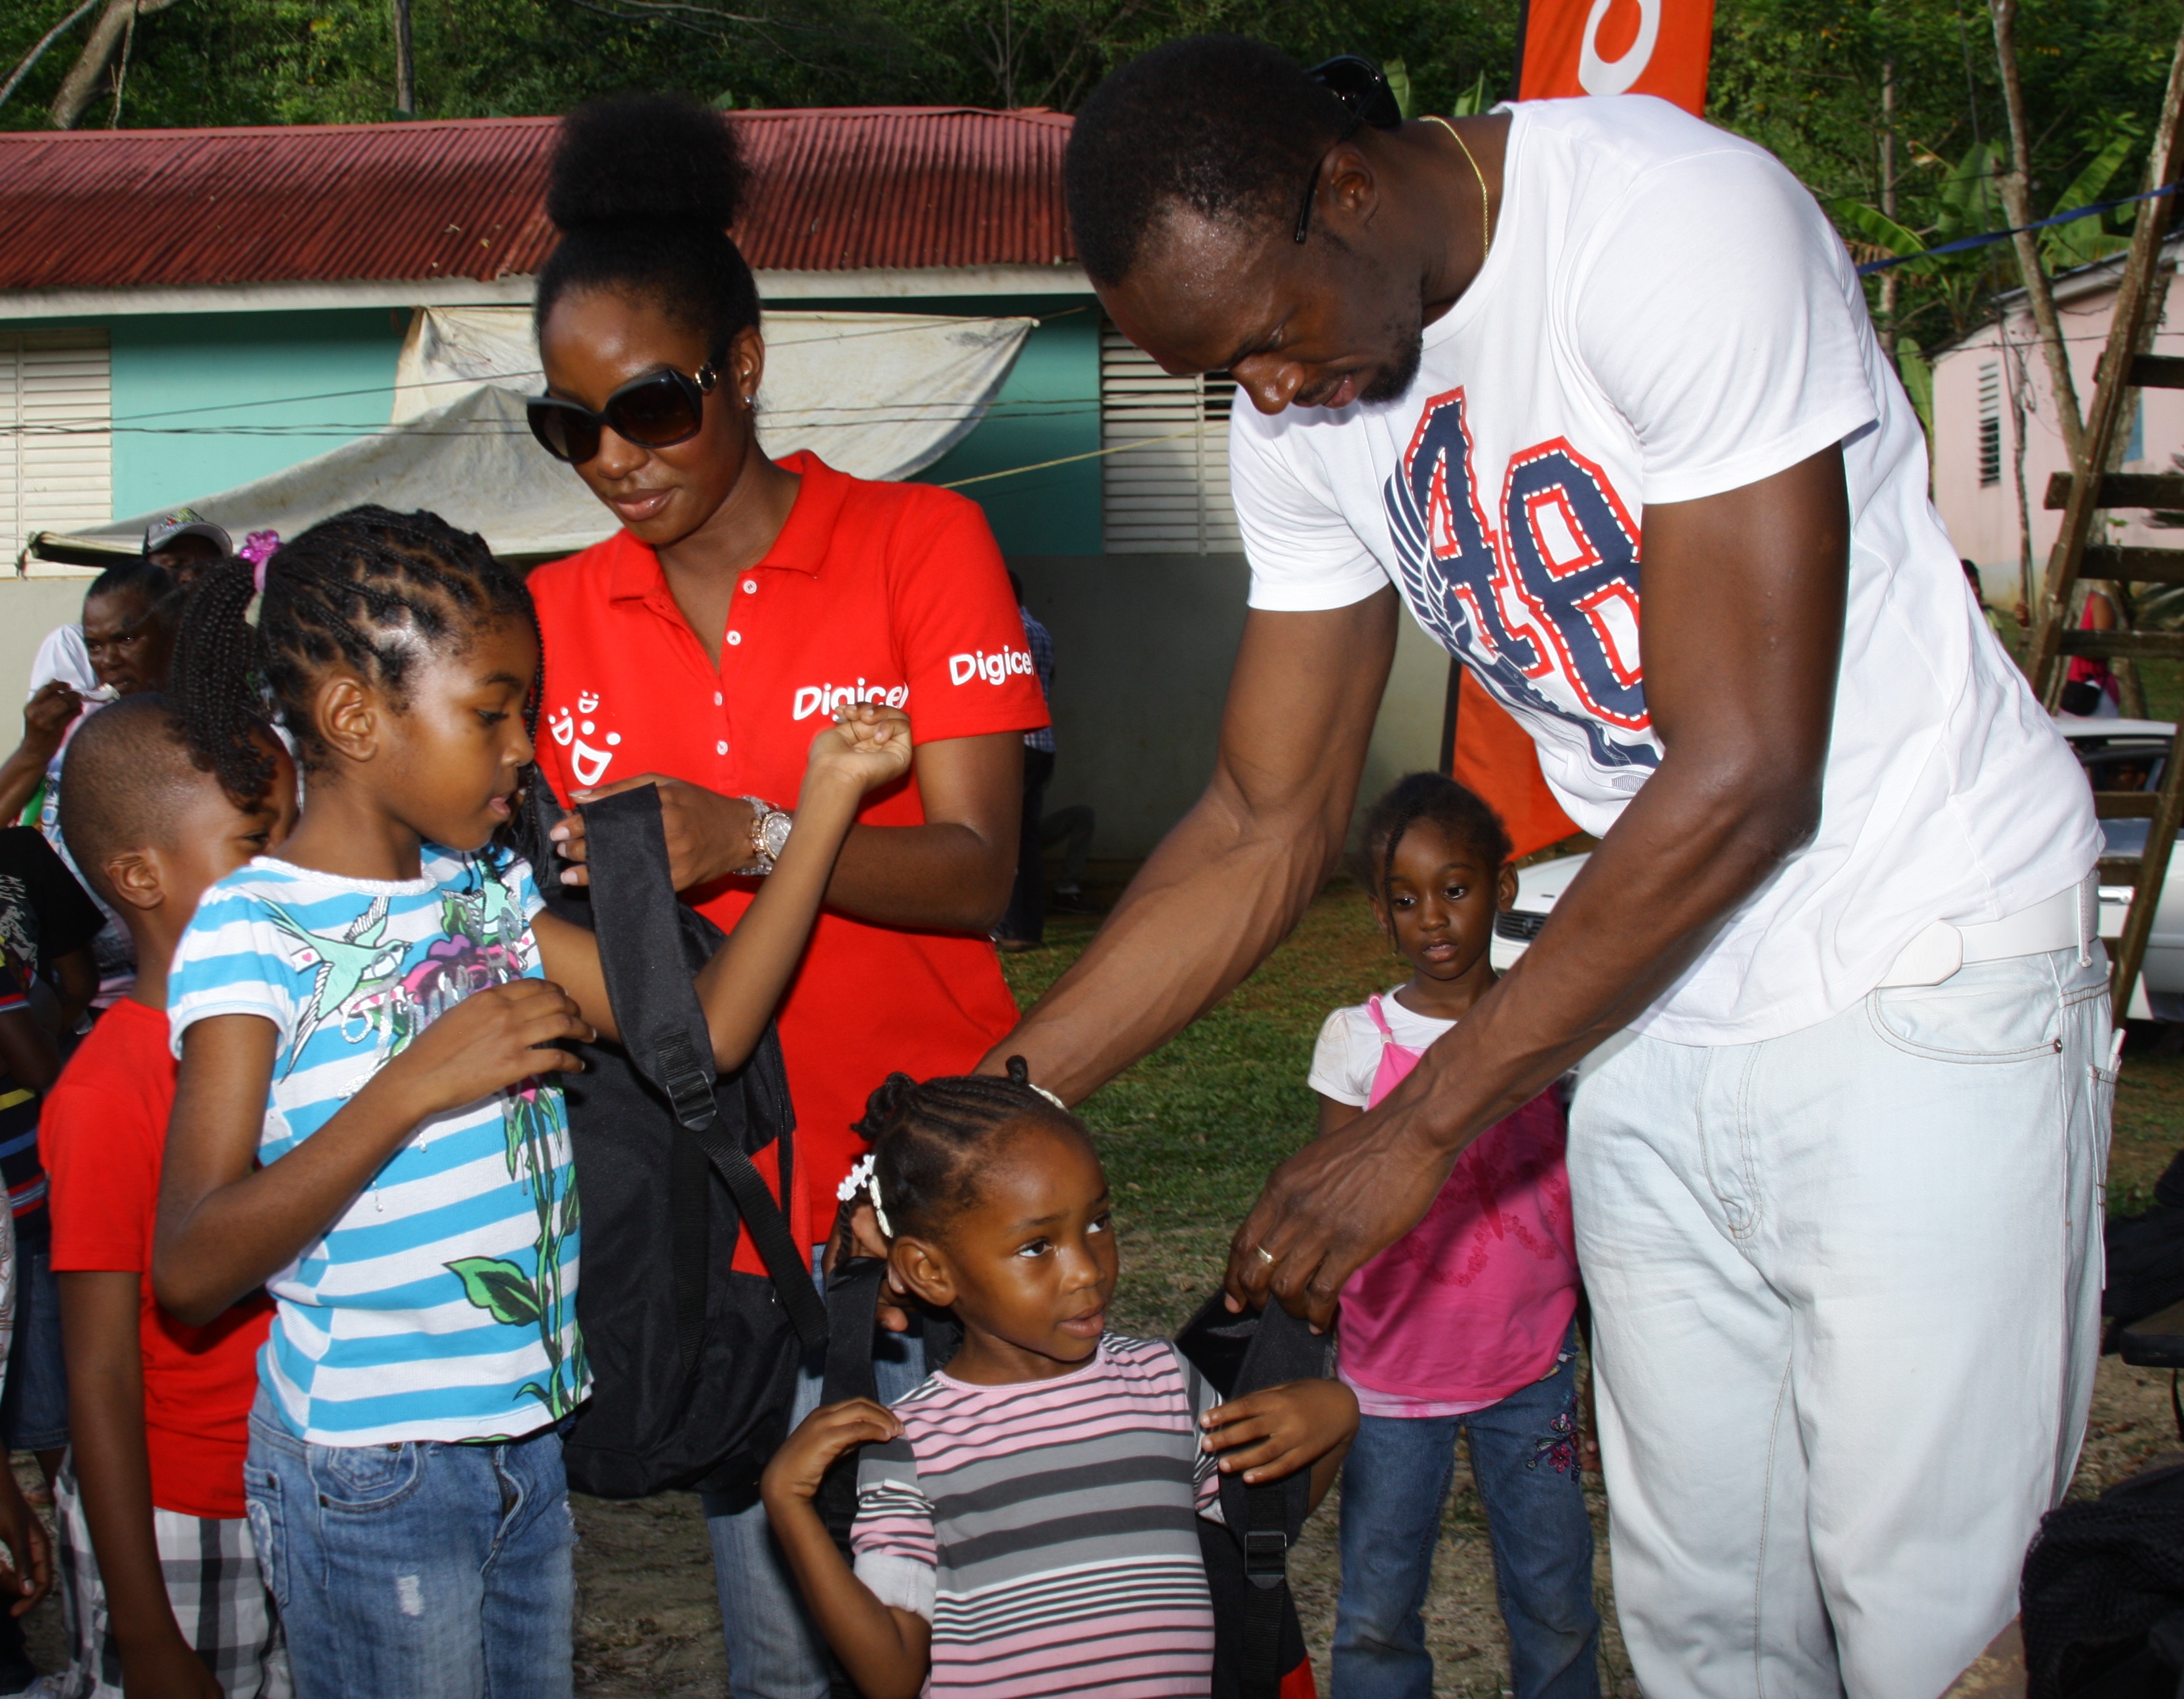 BOLT HOSTS TREAT IN HIS HOMETOWN ON BOXING DAY